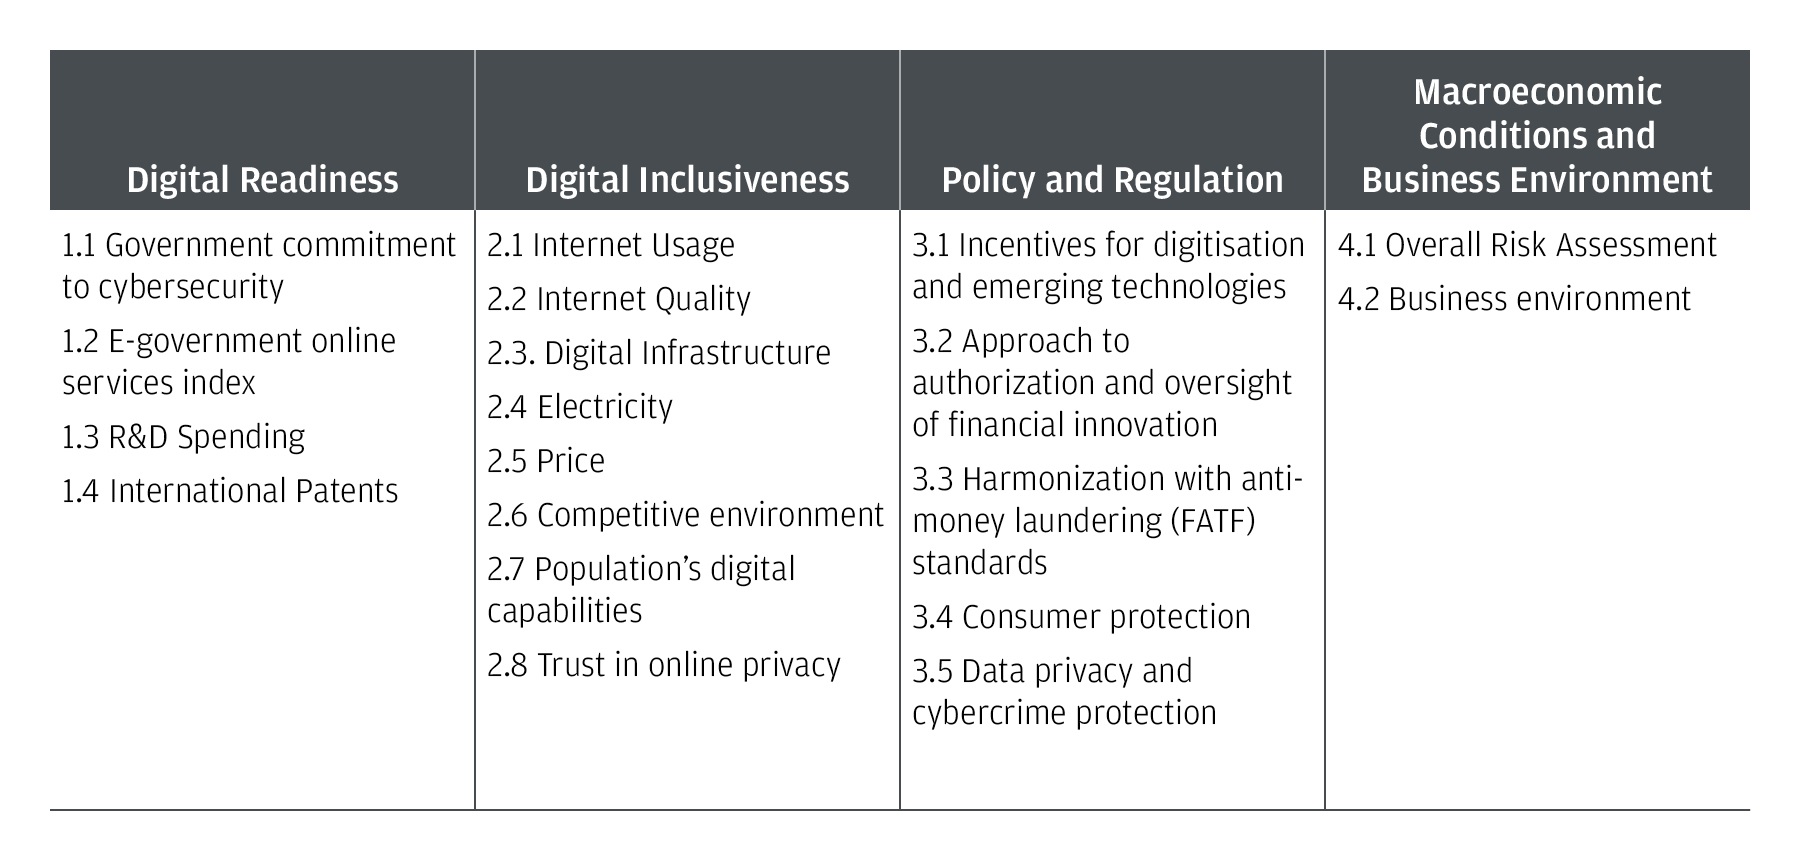 This graph shows the indicators of a healthy startup ecosystem: digital readiness, digital inclusiveness, policy and regulation, and macroeconomic conditions and business environment. To access the underlying data and methodology for this analysis, please see the Appendix